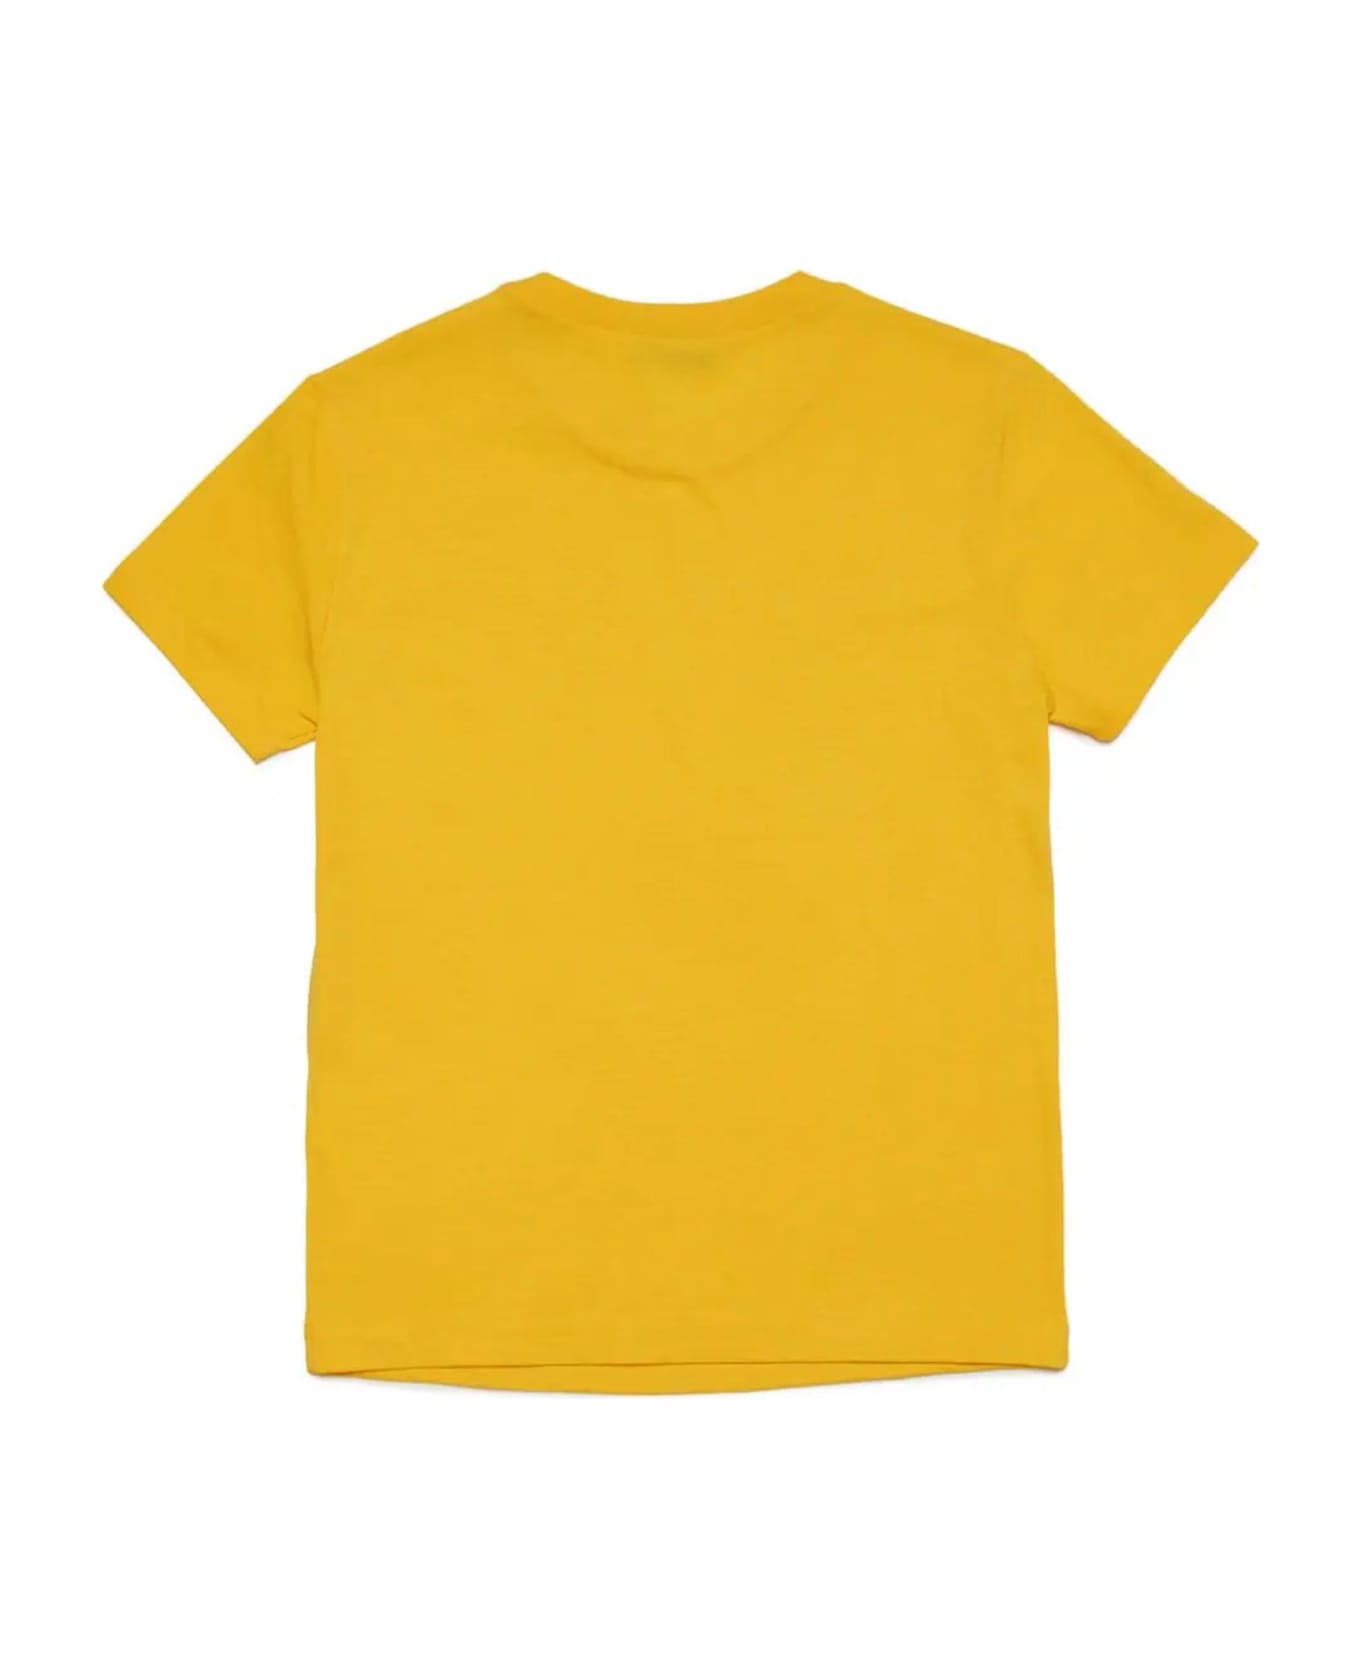 N.21 N°21 T-shirts And Polos Yellow - Yellow Tシャツ＆ポロシャツ